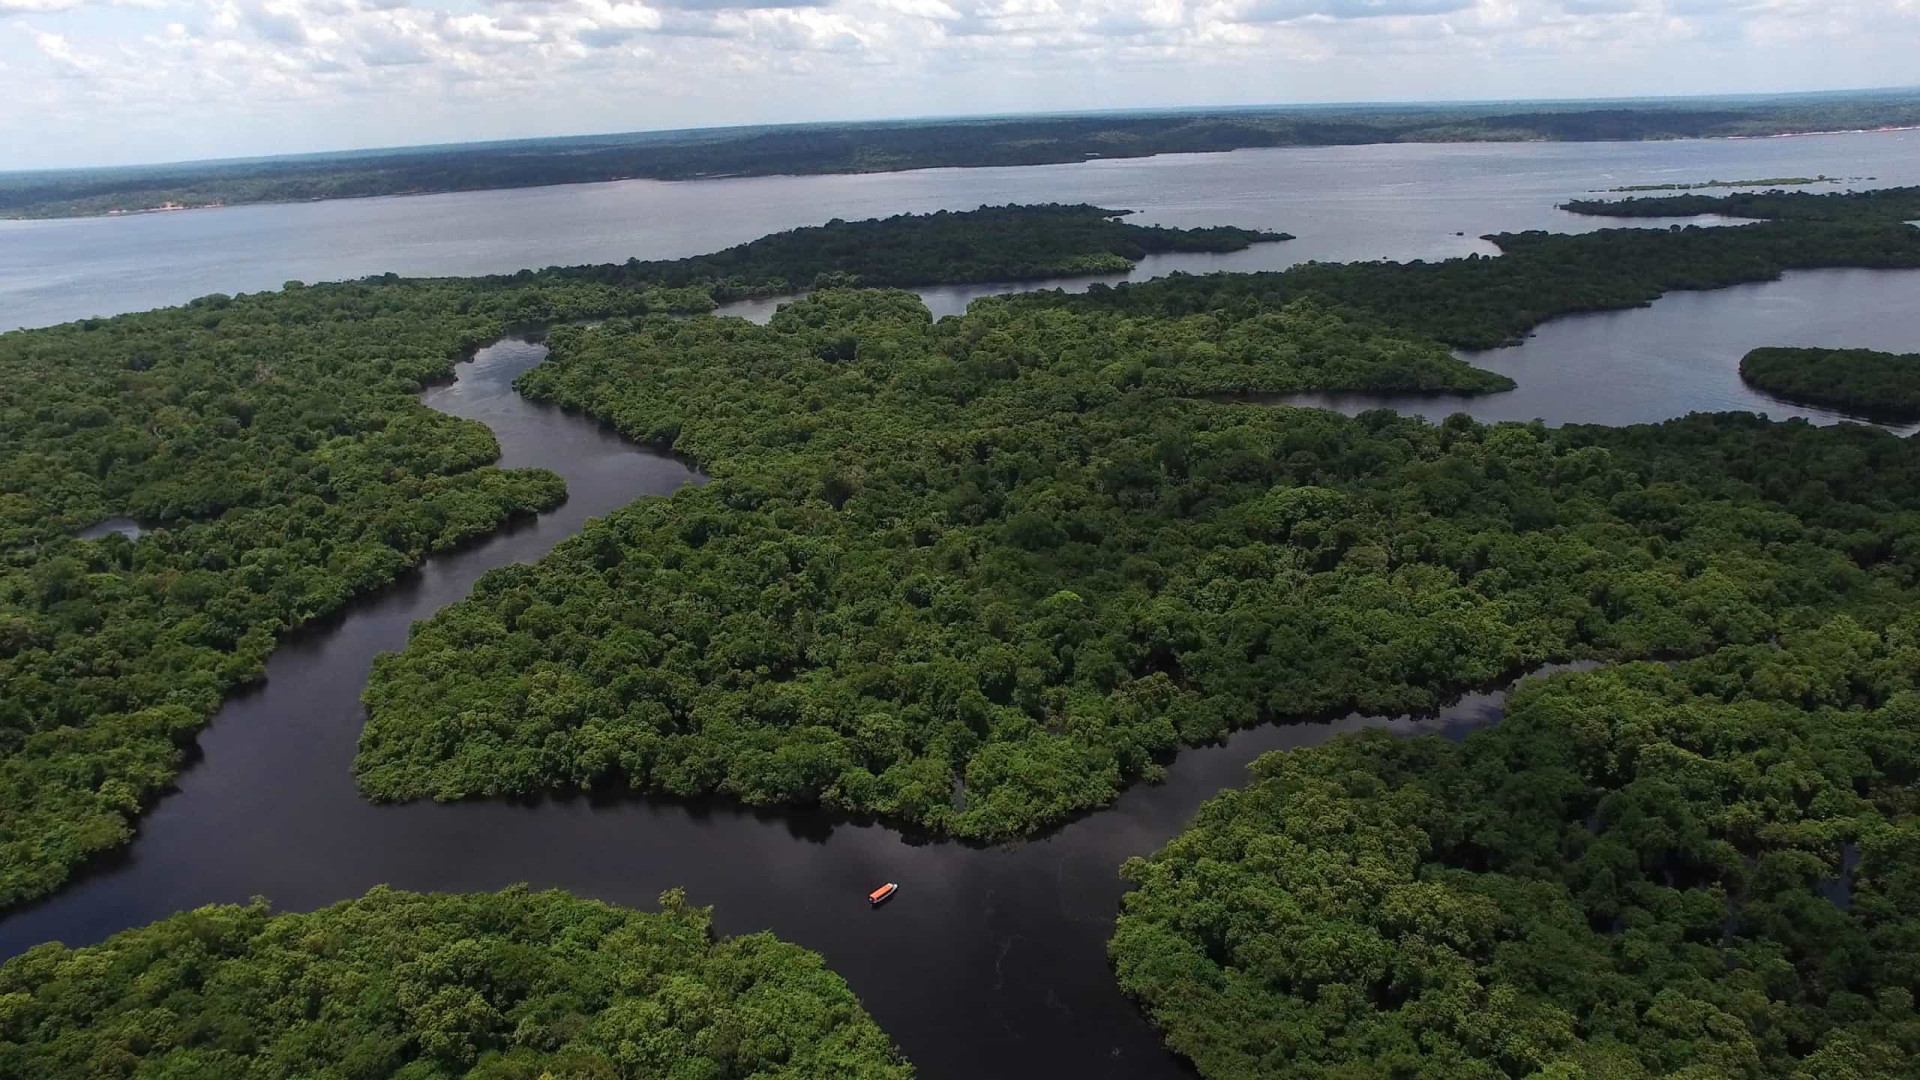 <p>Location: State of Amazonas<br>Criteria: Natural<br>Year established: 2000<br>Description: The largest protected area in the Amazon basin, the site is notable for its high biodiversity, range of habitats, and several endangered species.</p><p><a href="https://www.msn.com/en-us/community/channel/vid-7xx8mnucu55yw63we9va2gwr7uihbxwc68fxqp25x6tg4ftibpra?cvid=94631541bc0f4f89bfd59158d696ad7e">Follow us and access great exclusive content every day</a></p>